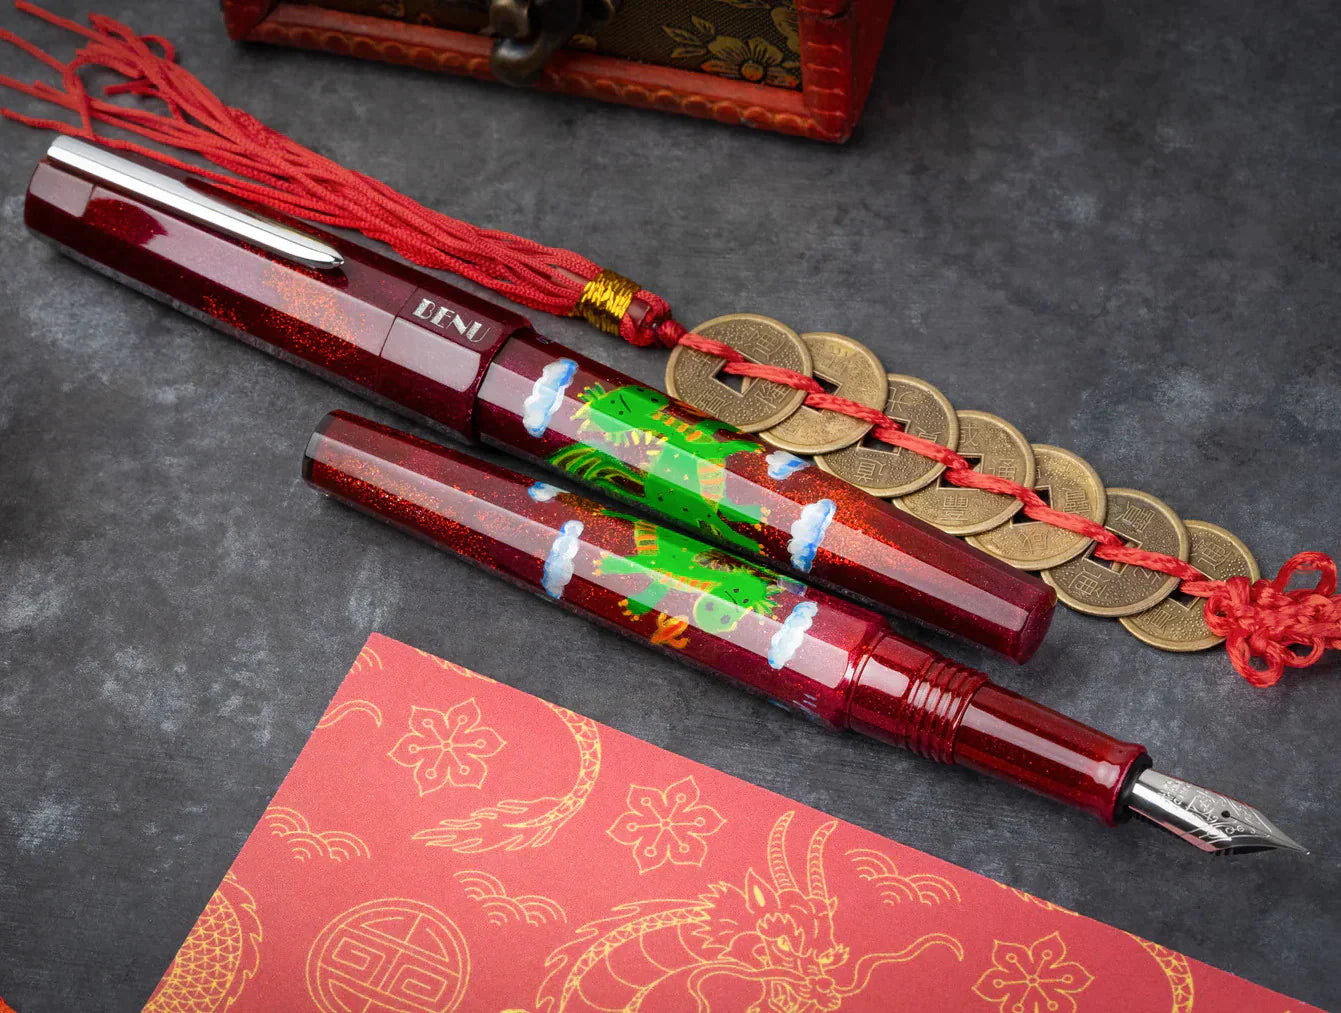 BENU's 'Draco Darling' Limited Edition Fountain Pen - Chinese New Year 2024 Celebration